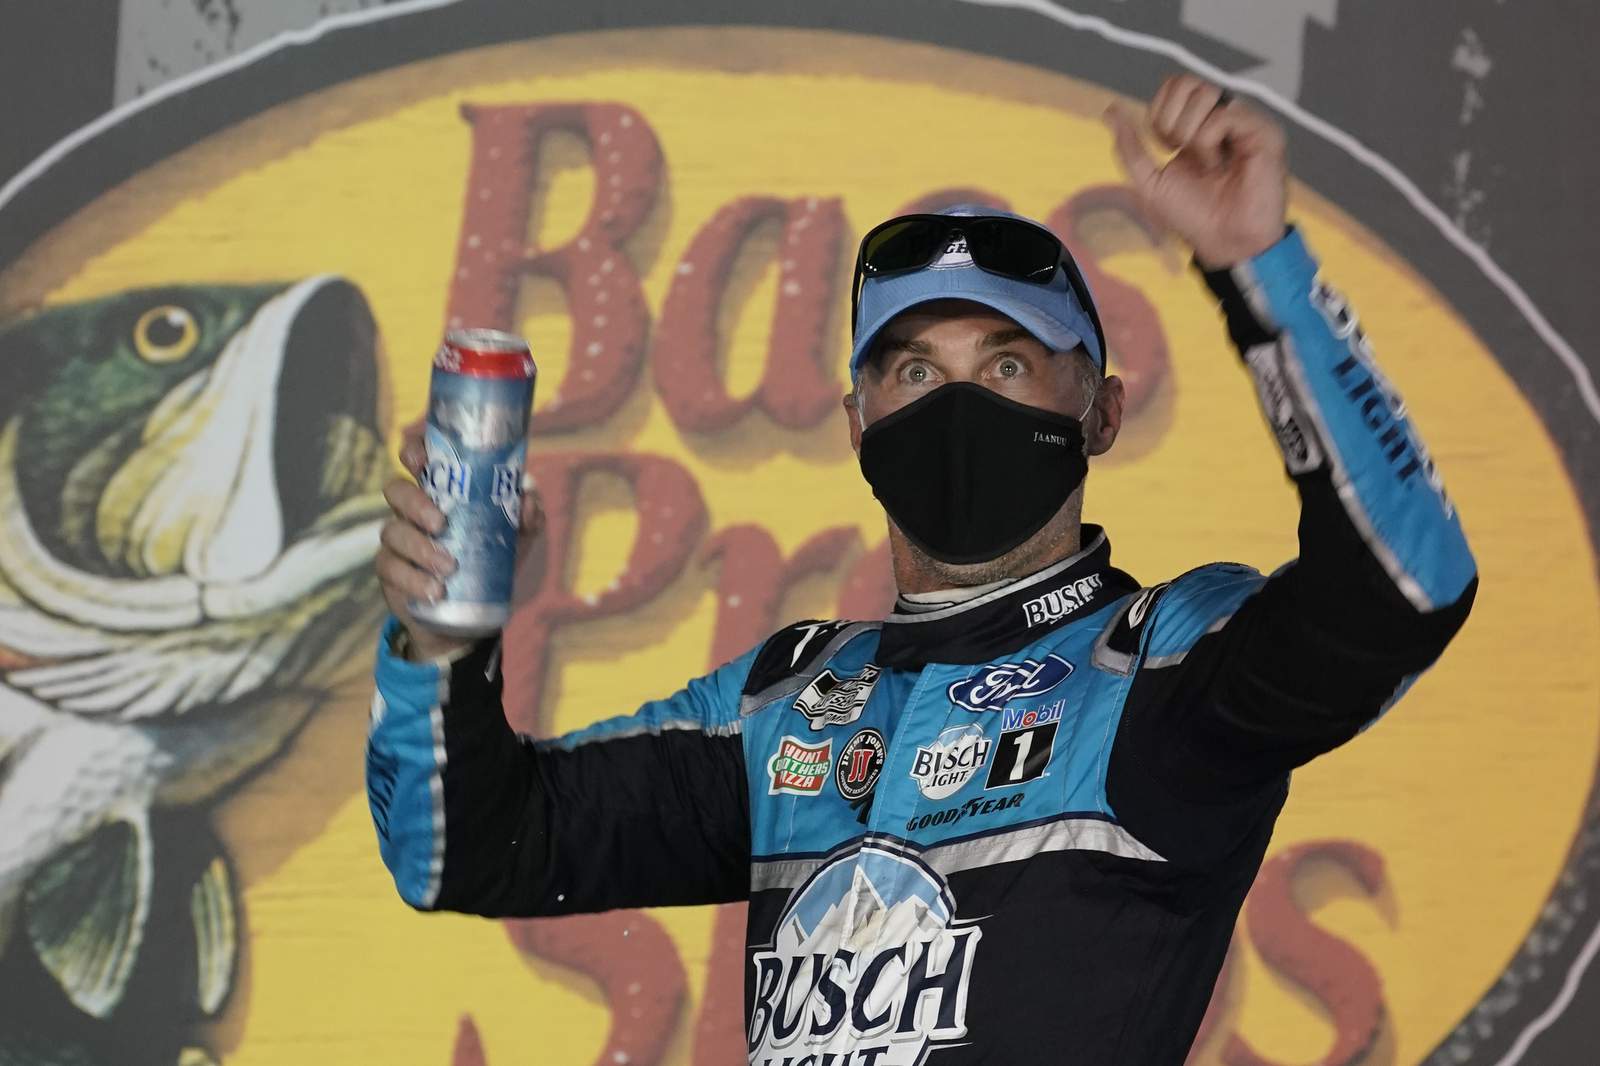 Kevin Harvick nabs 9th win of season to roll into 2nd round